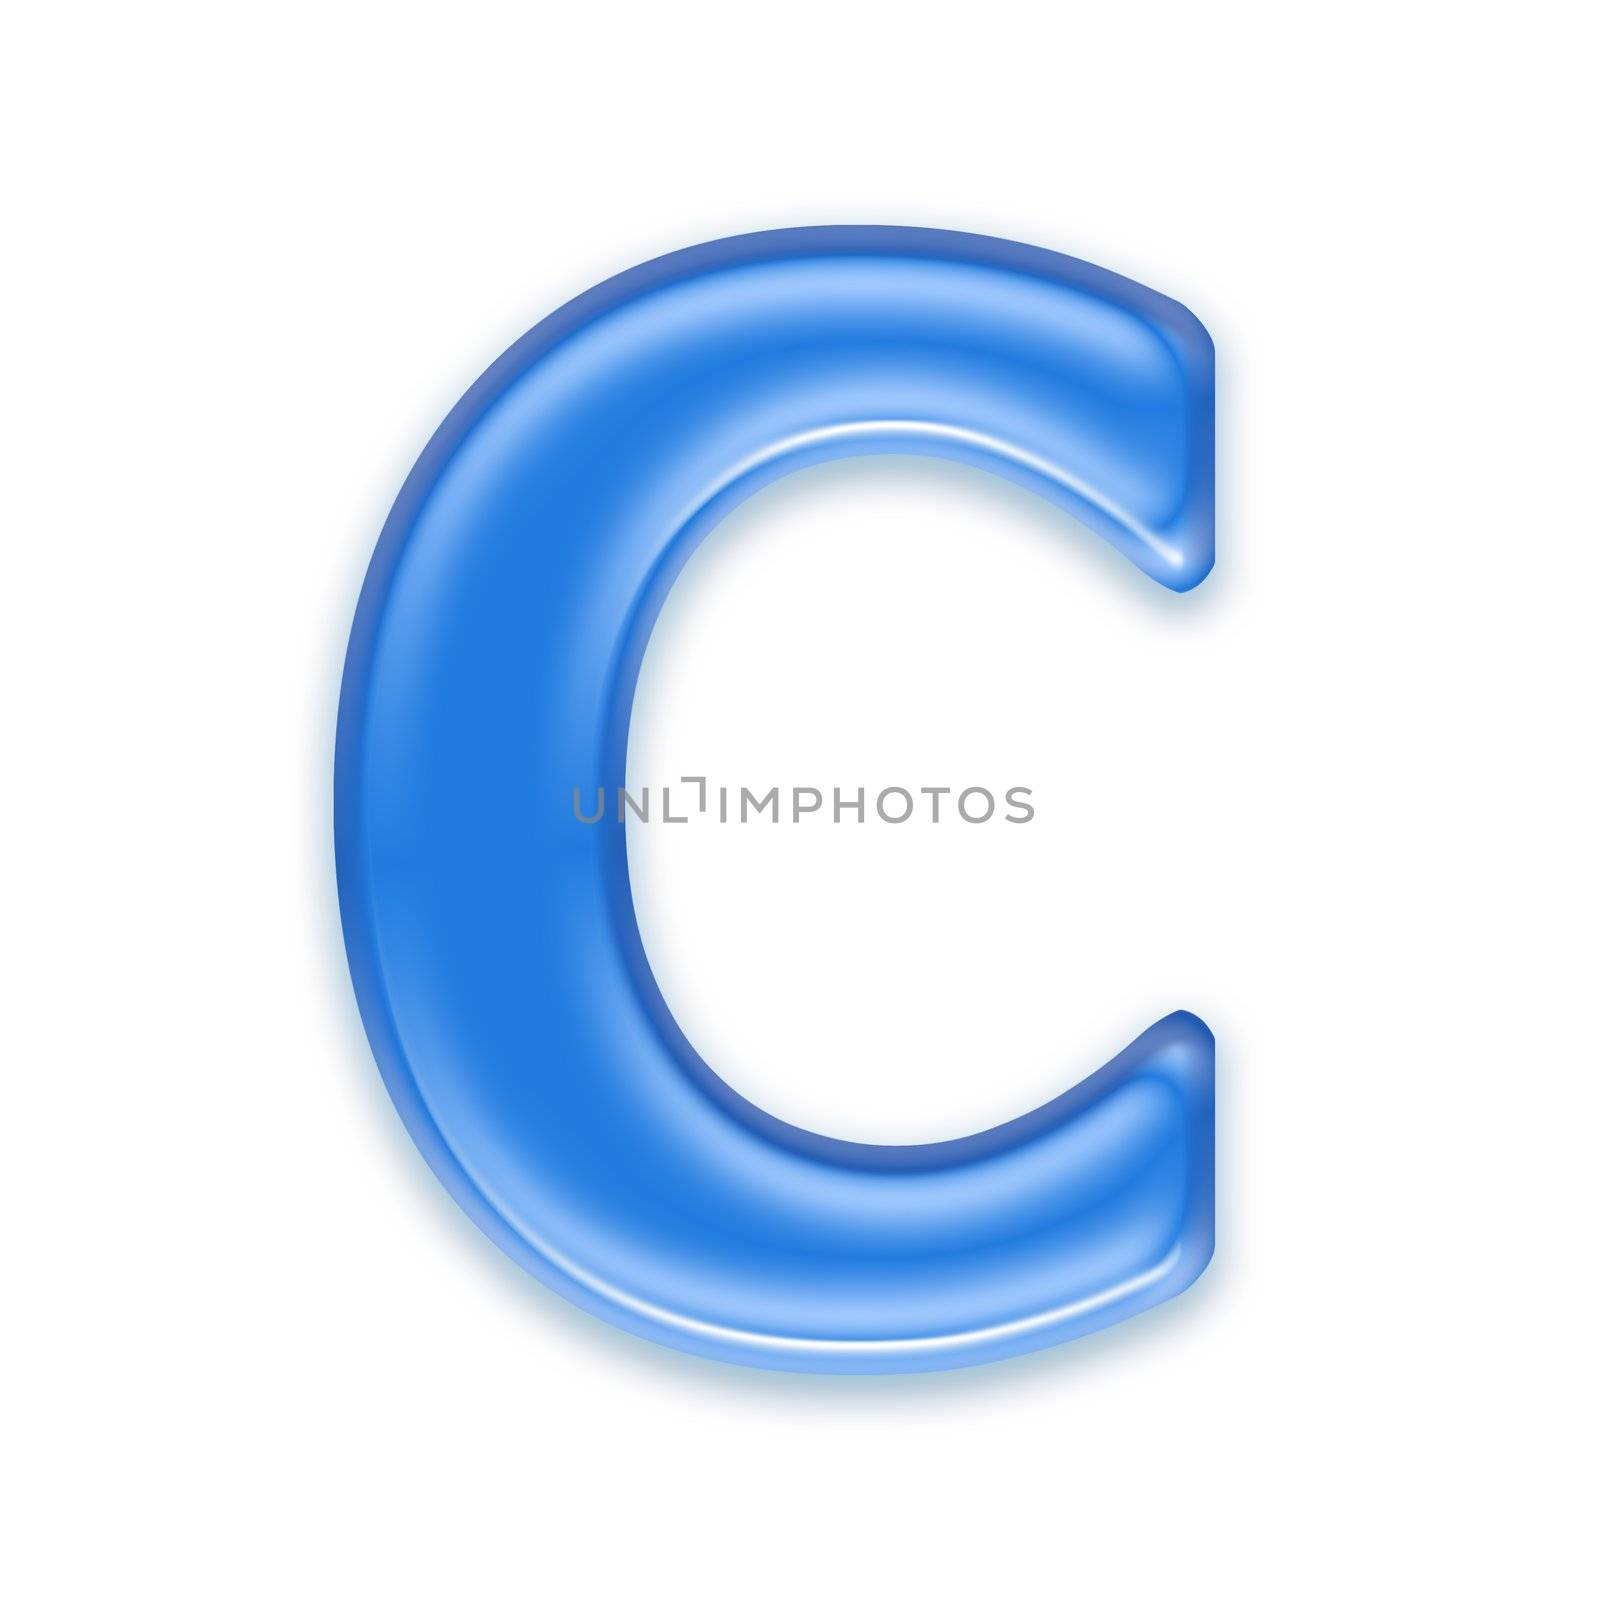 Aqua letter isolated on white background  - C by chrisroll